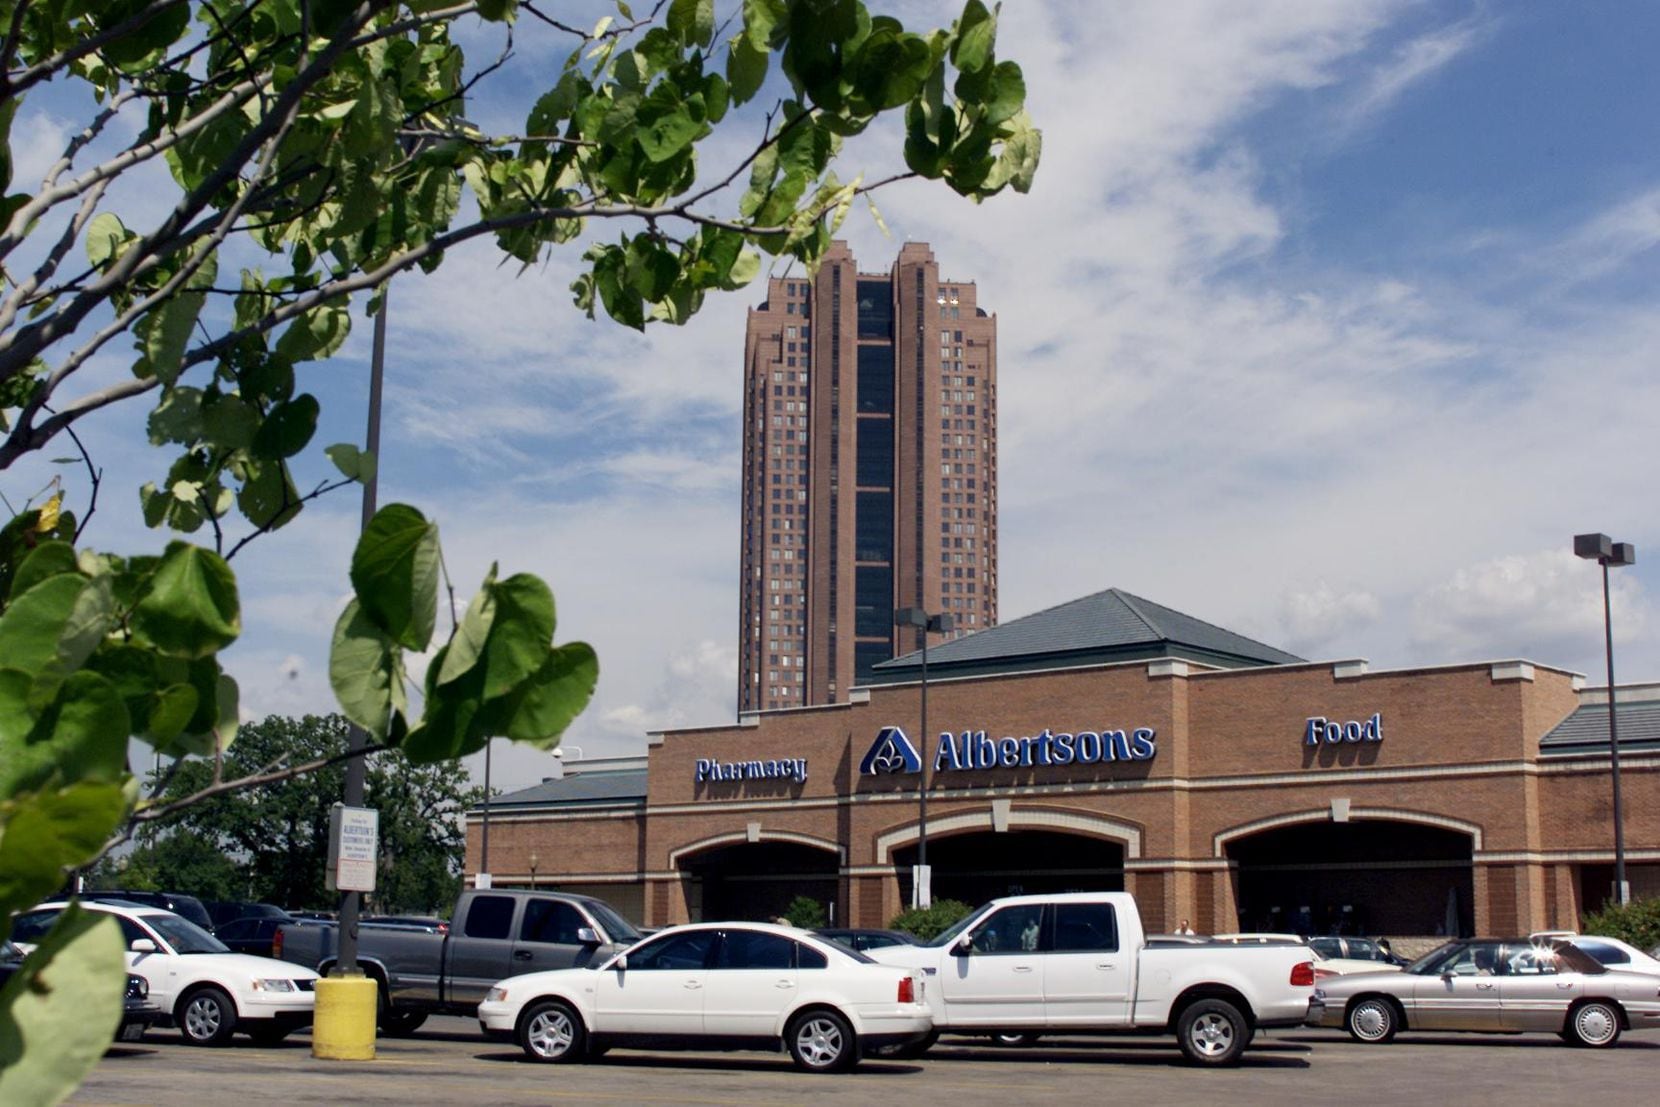 The new Uptown Dallas project is on the former site of an Albertson's store.